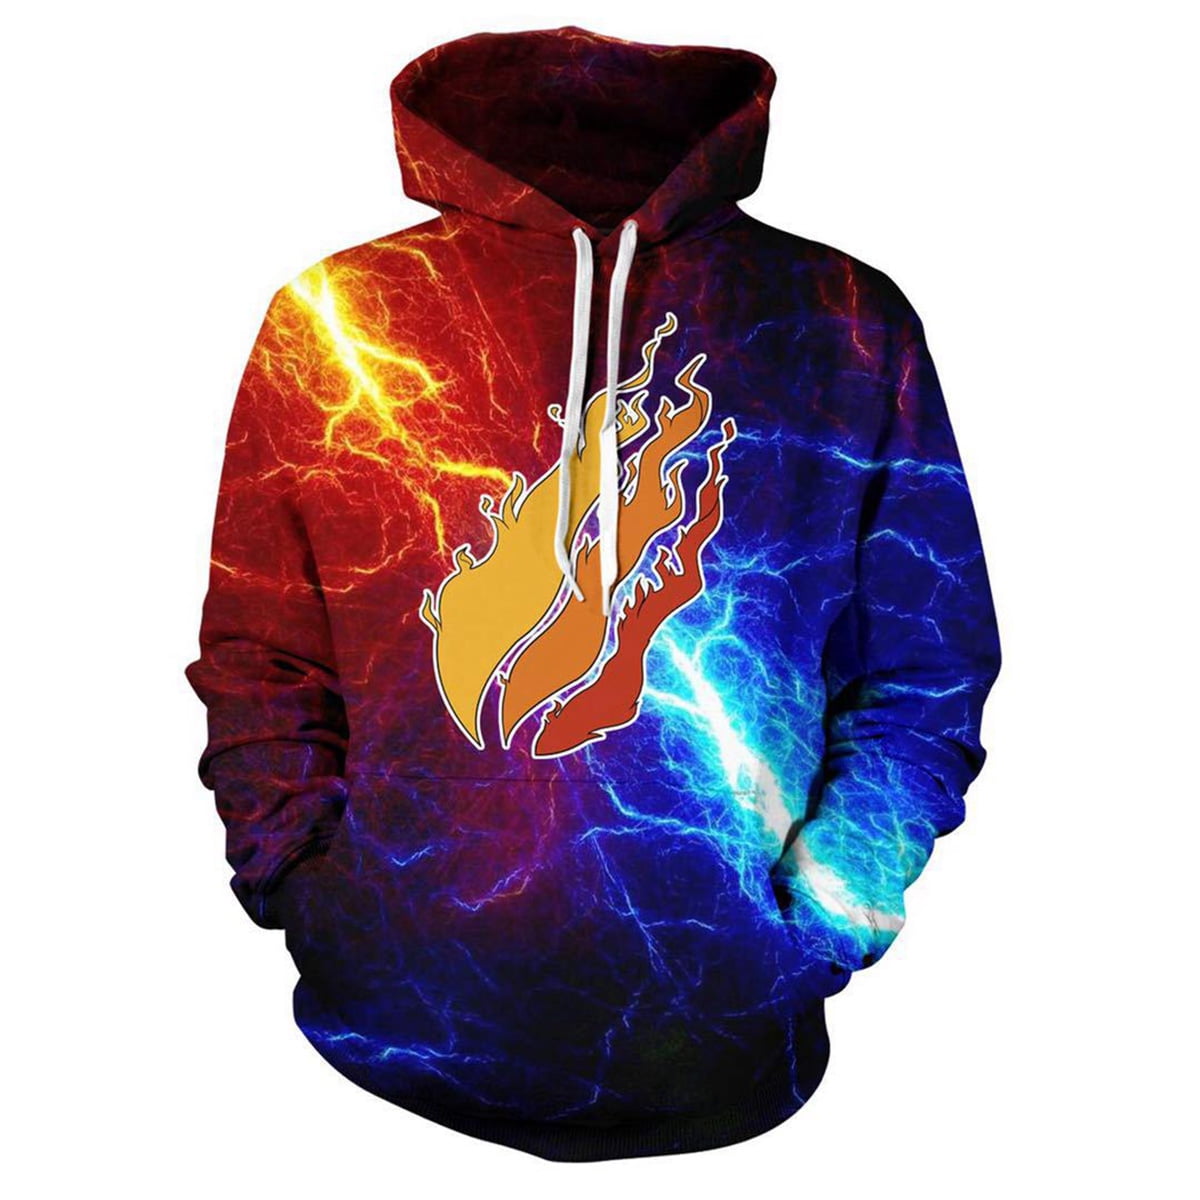 diqiuzhiyan Preston-Playz Hoodies for Youth Boys Girls 3D Graphic Hooded Sweatshirt Fire Flame Fashion Pullover with Pocket